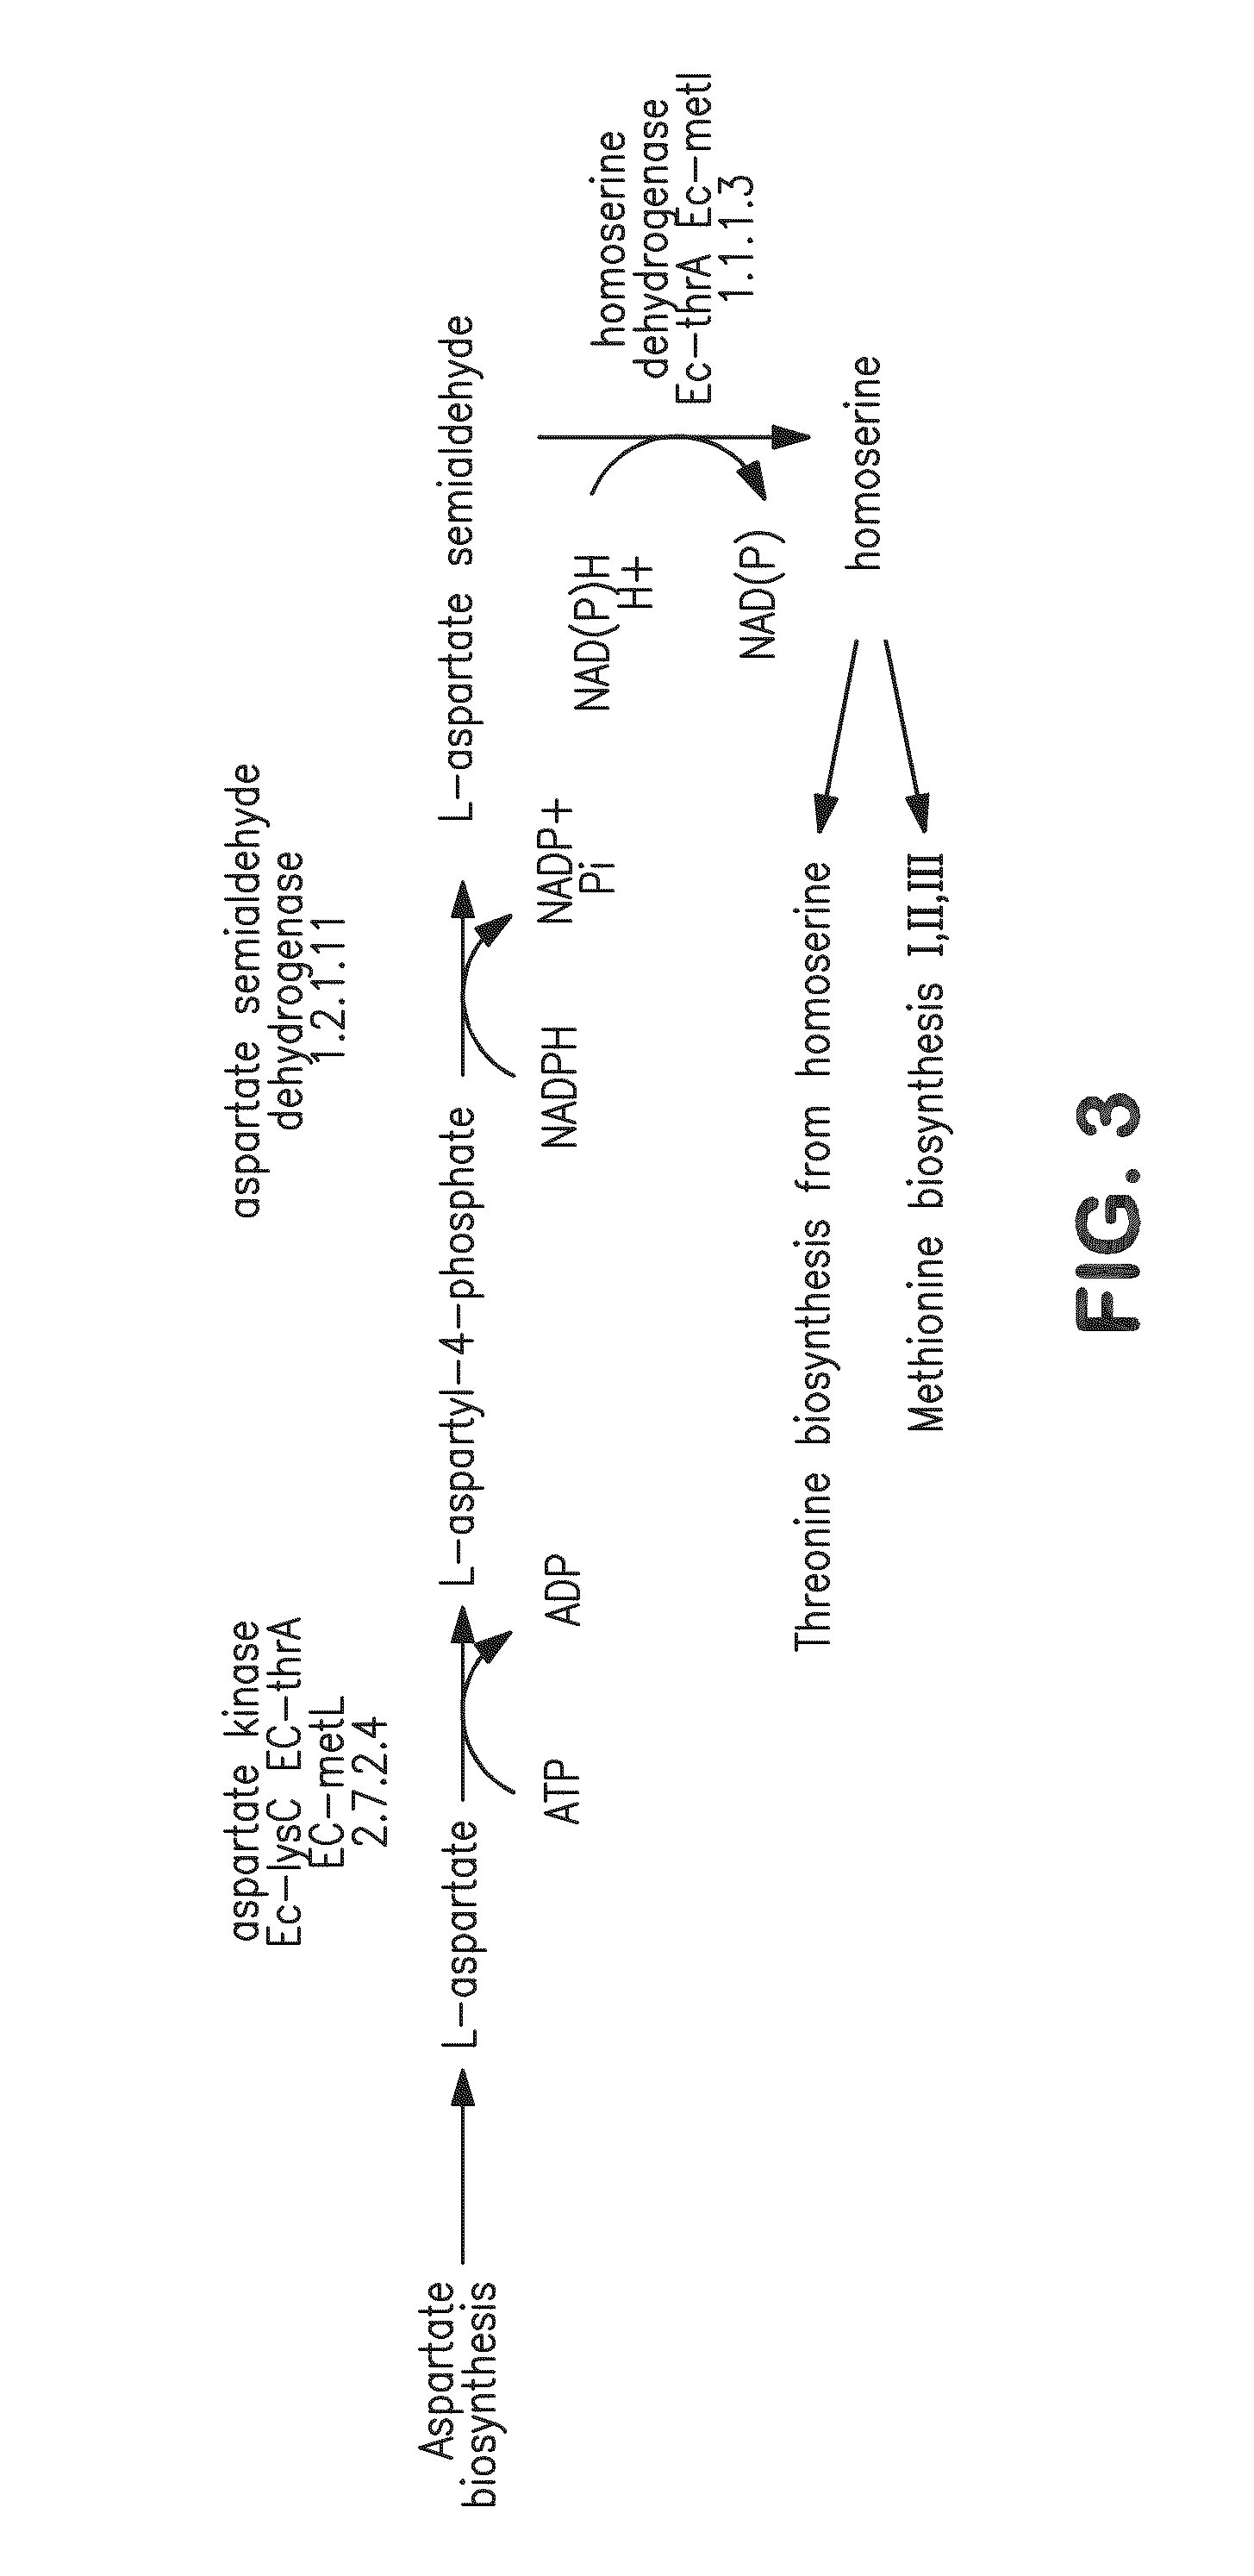 Compositions and methods for the biosynthesis of 1,4-butanediol and its precursors